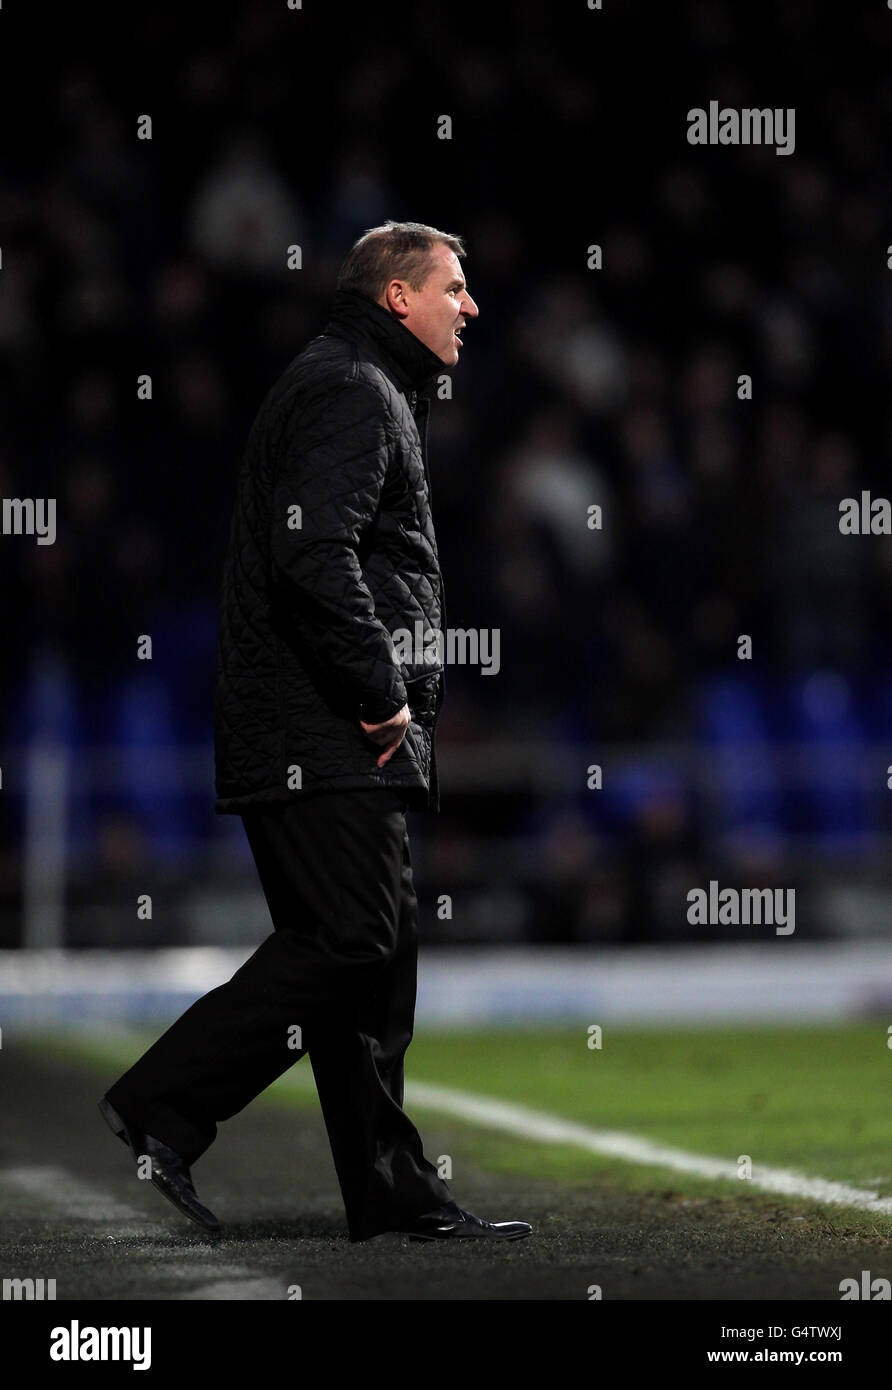 Ipswich Town manager Paul Jewell on the touchline during the npower Championship match at Portman Road, Ipswich. Stock Photo